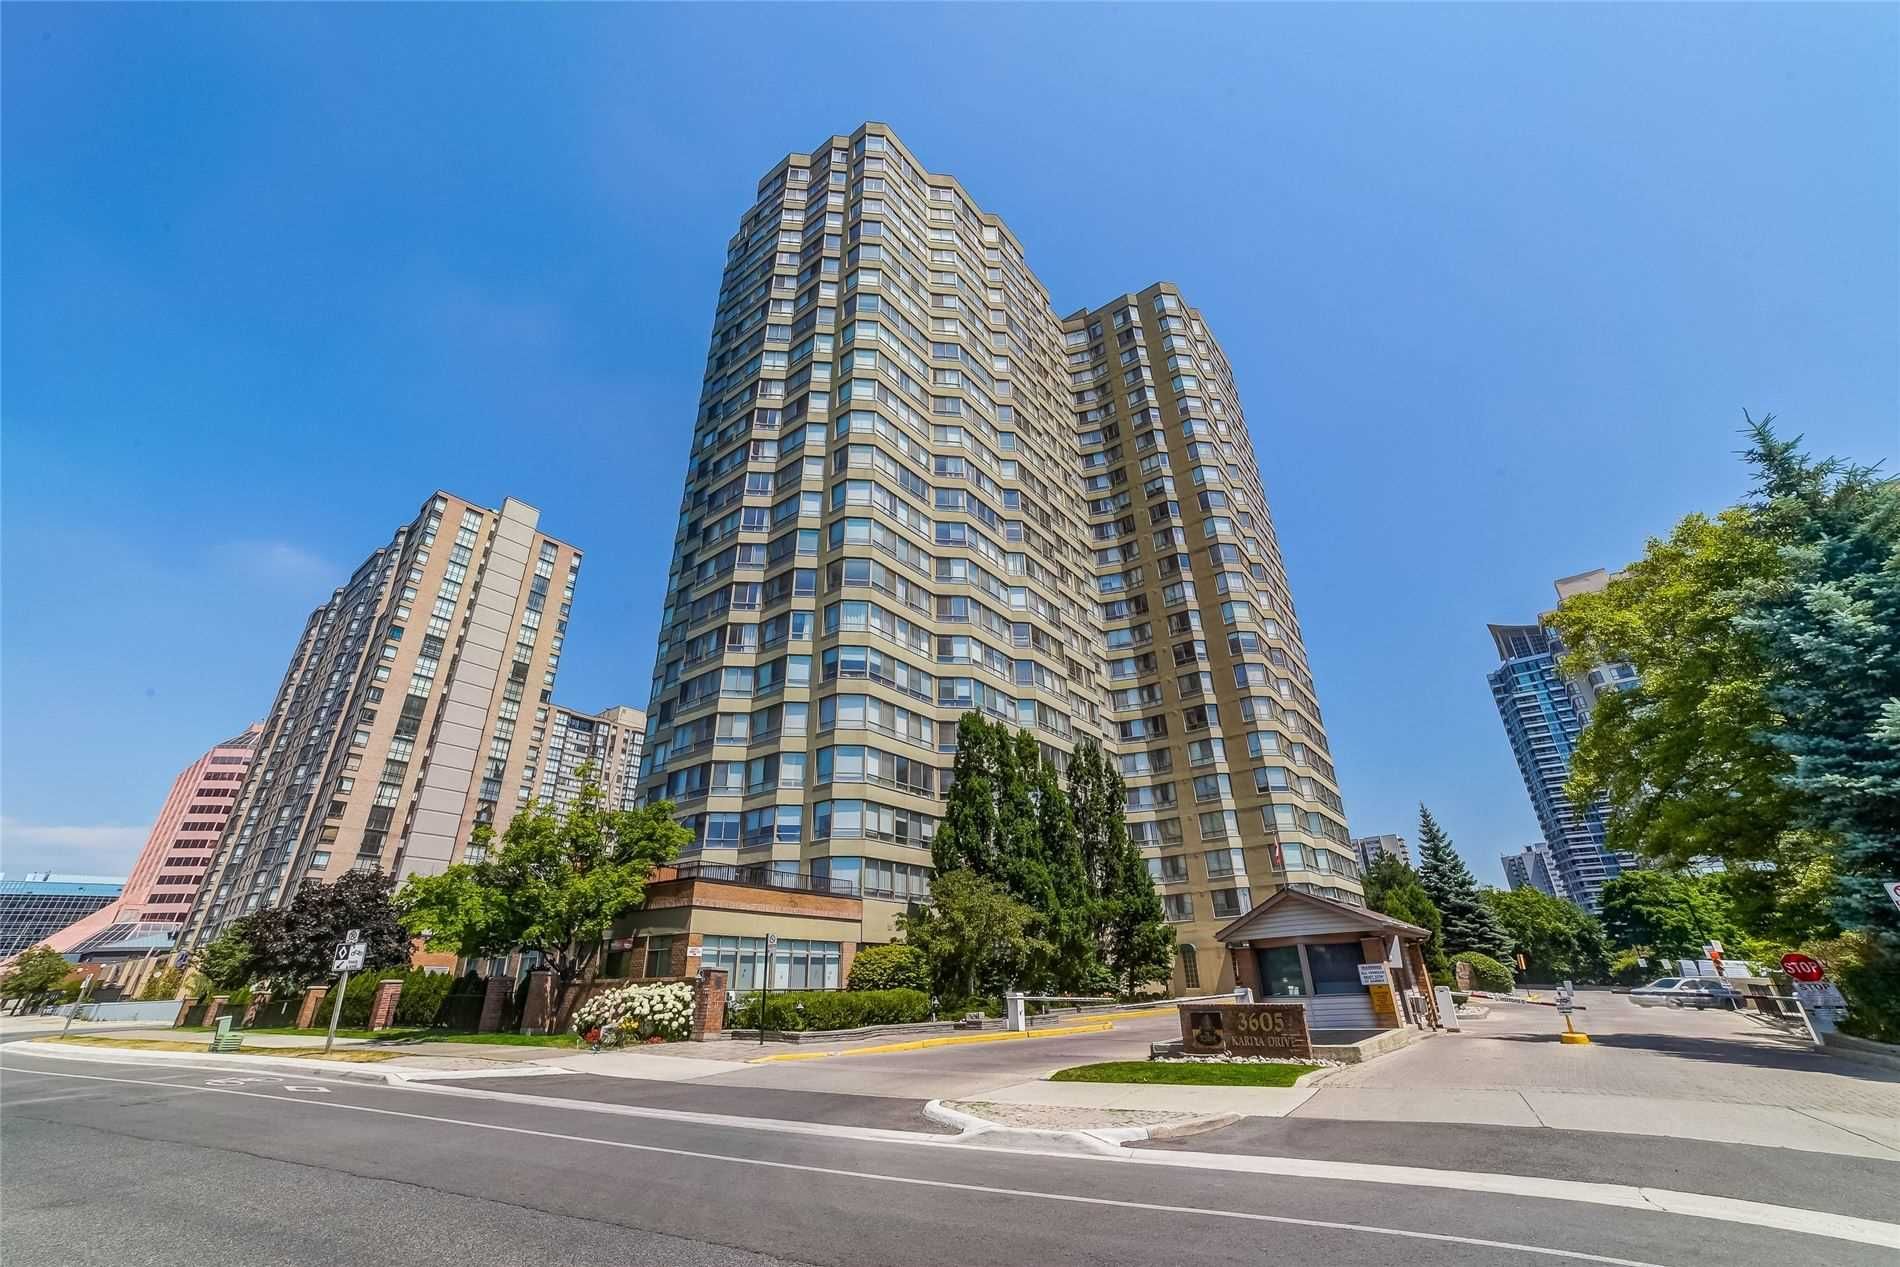 3567-3605 Kariya Dr. This condo at The Towne Condos is located in  Mississauga, Toronto - image #1 of 3 by Strata.ca